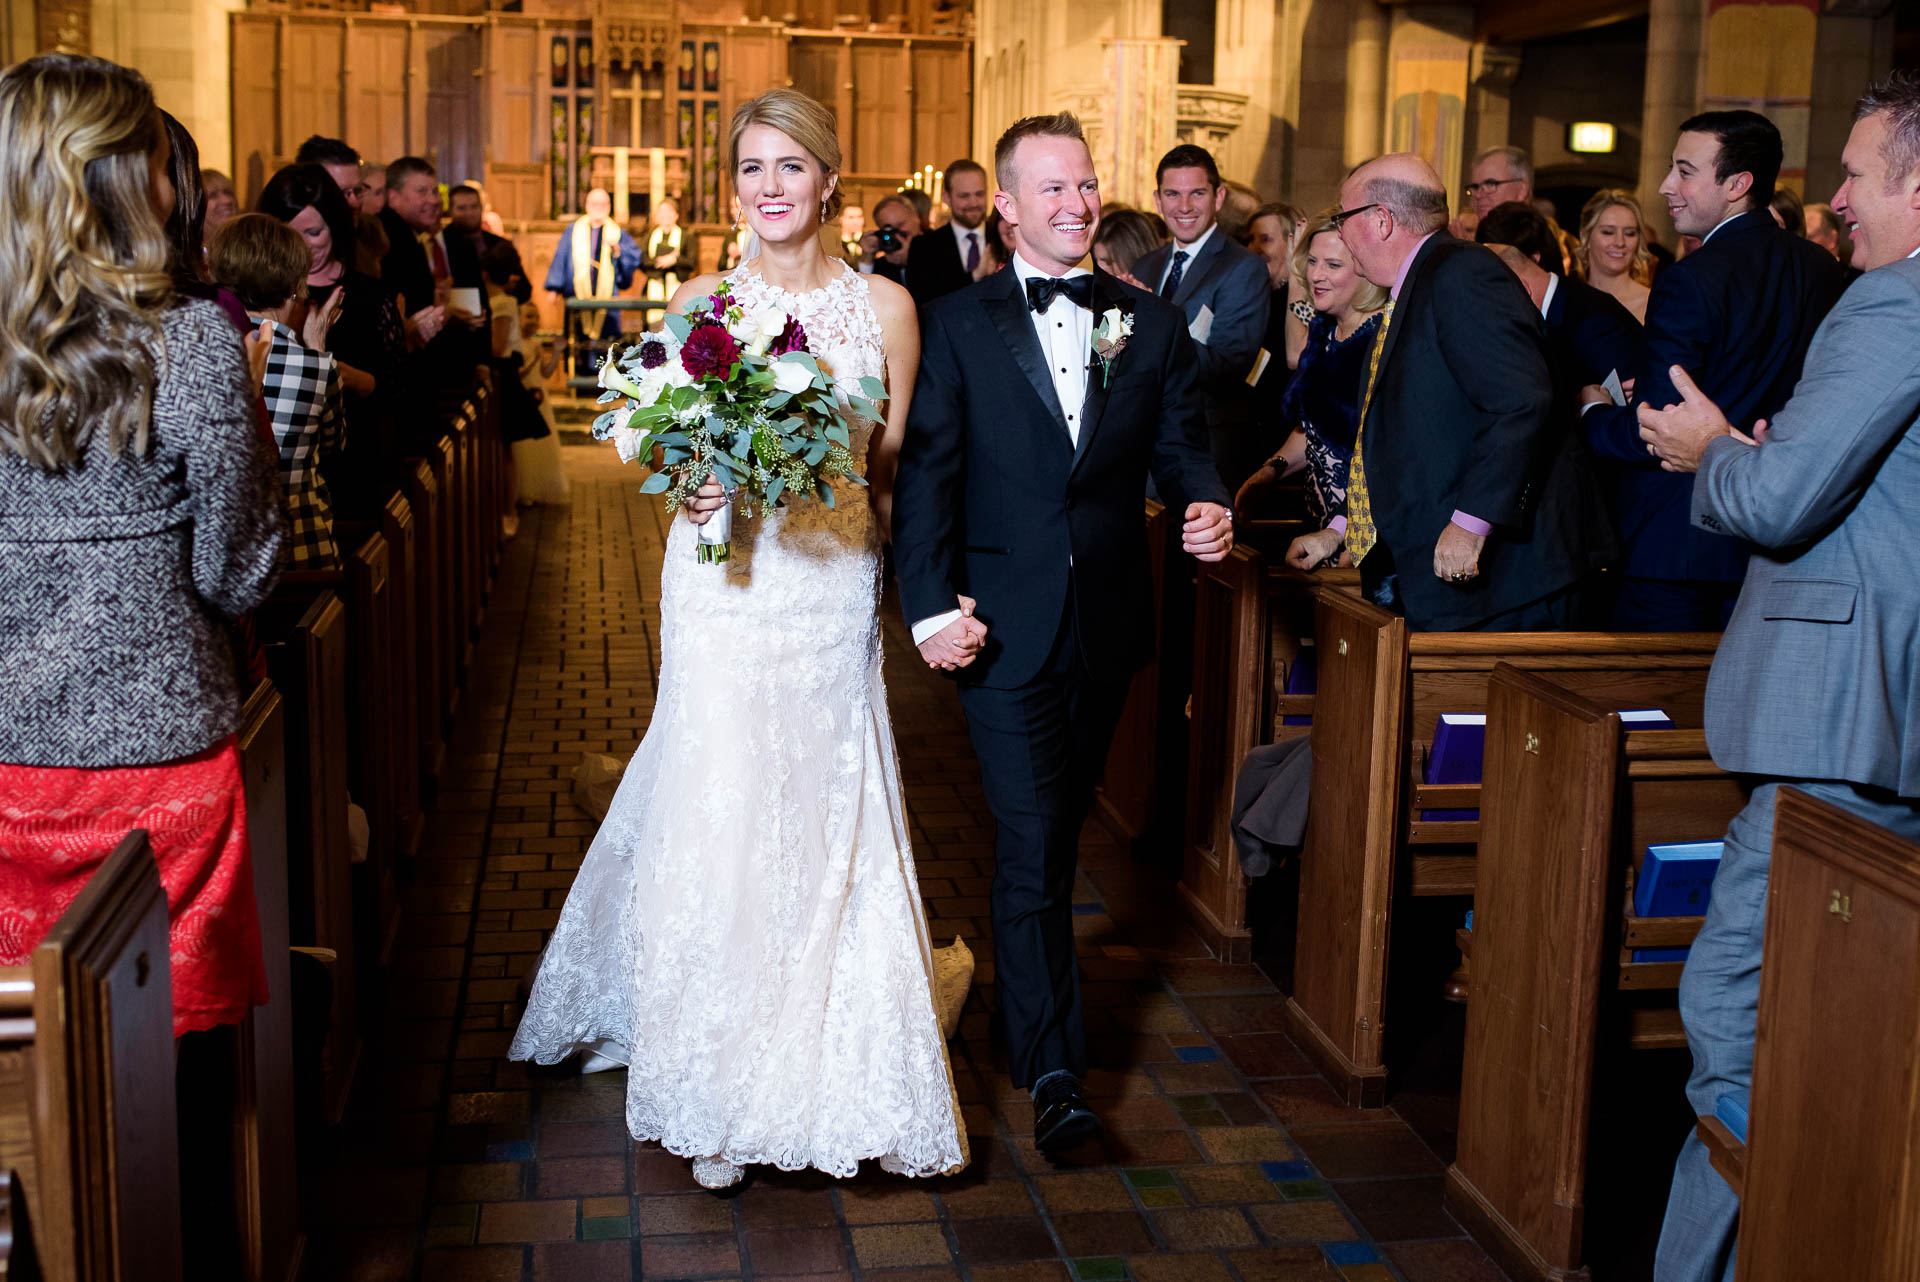 Bride and groom walk down the aisle during their wedding ceremony at Fourth Presbyterian Church in Chicago.